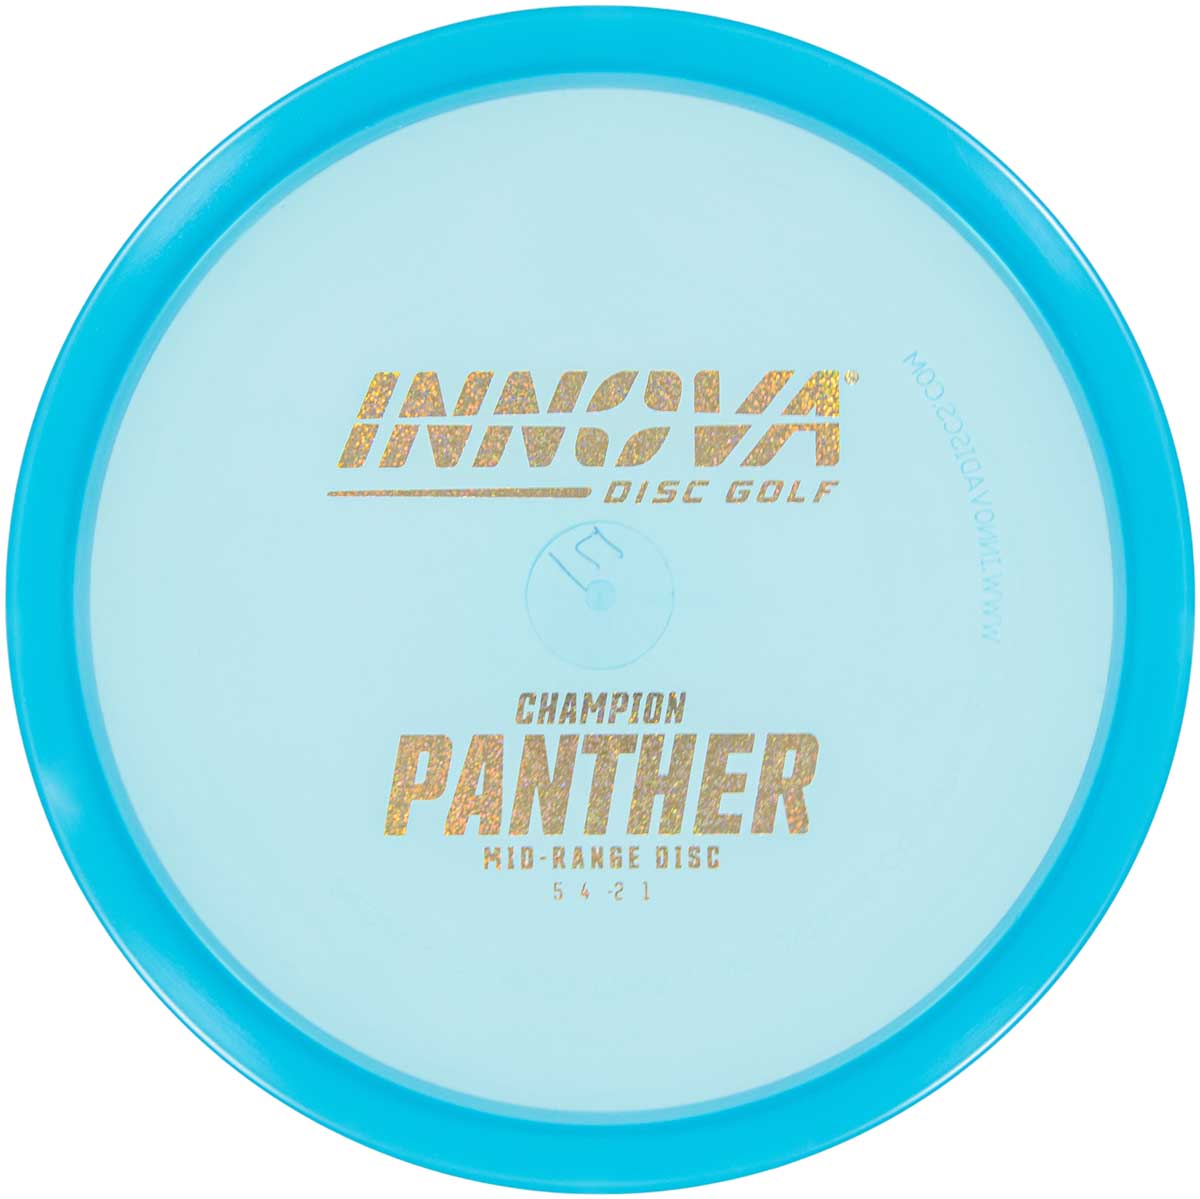 Champion Panther from Disc Golf United